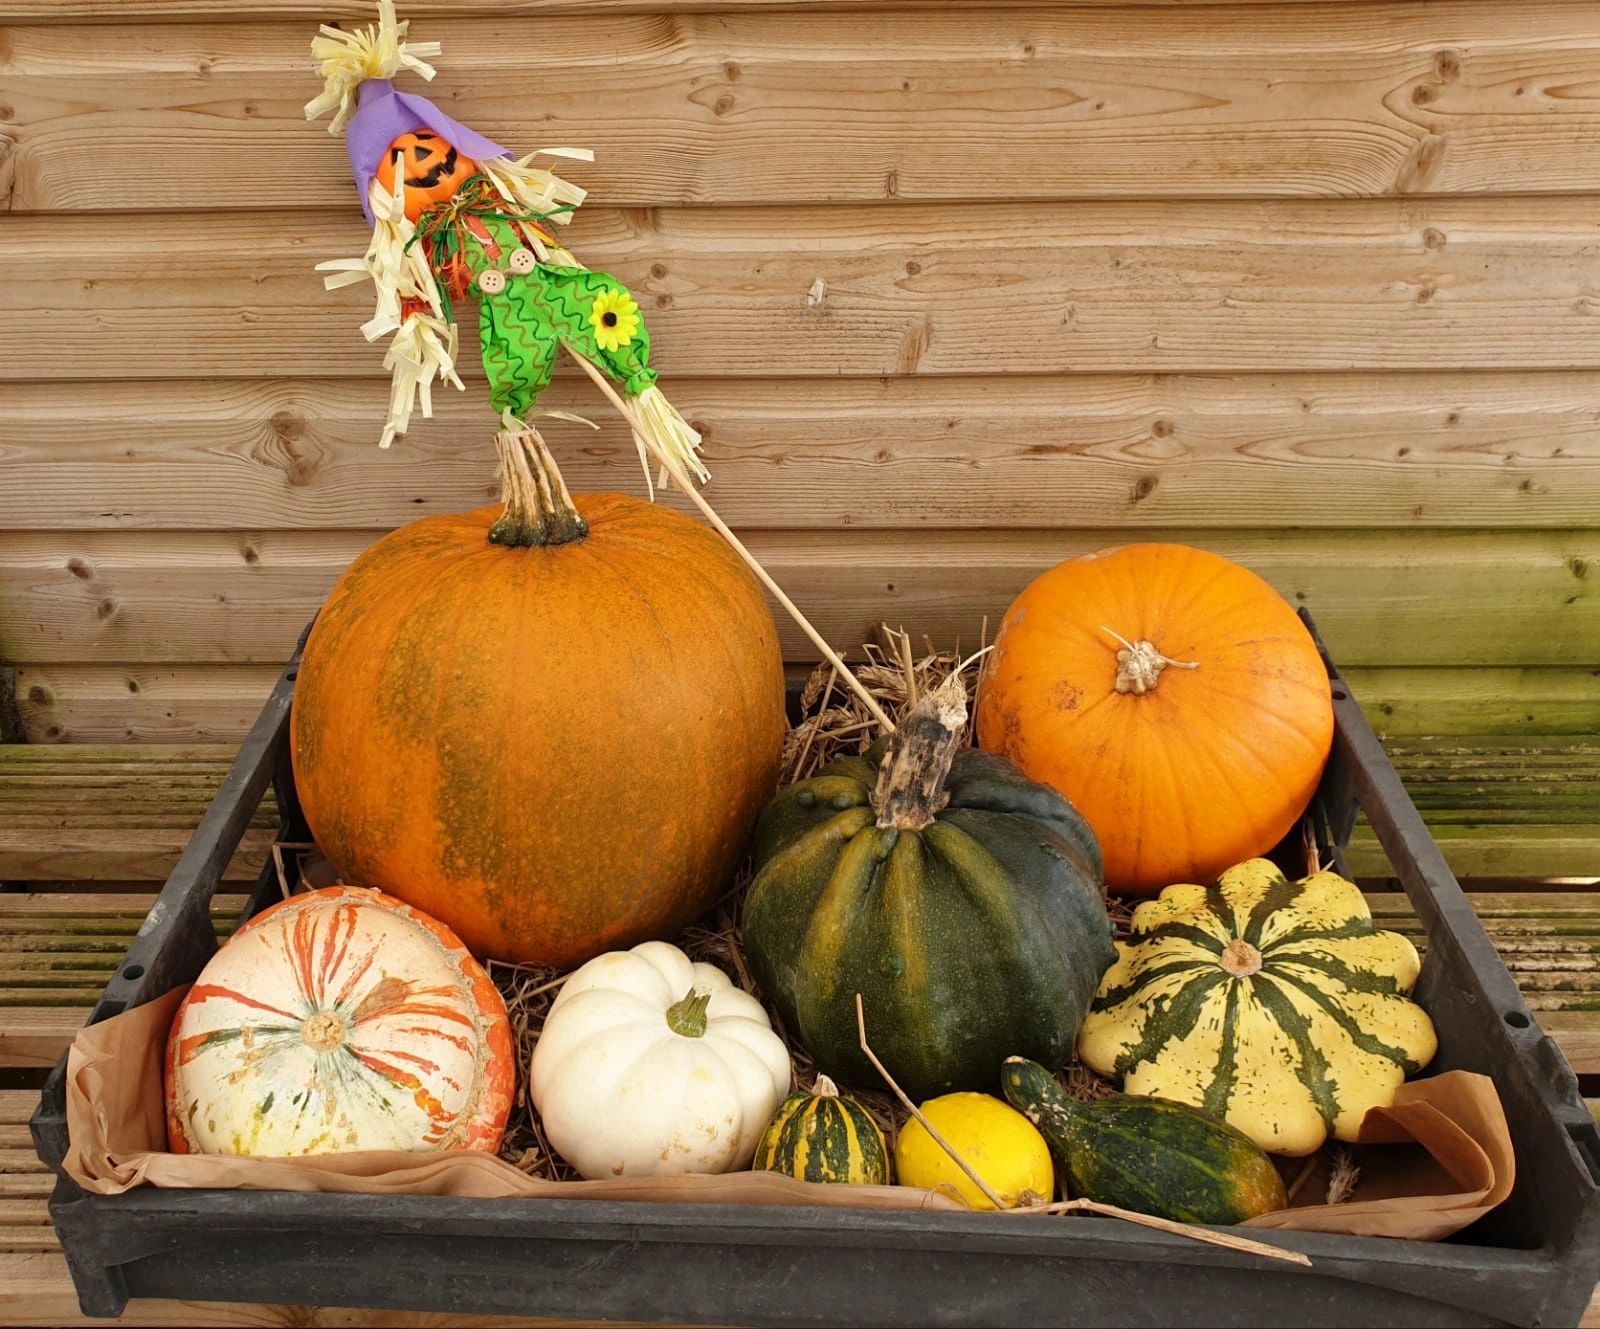 Autumn Pumpkin & Gourds Selection £ 20.00 while stocks last. Available to order on web shop in Hallo